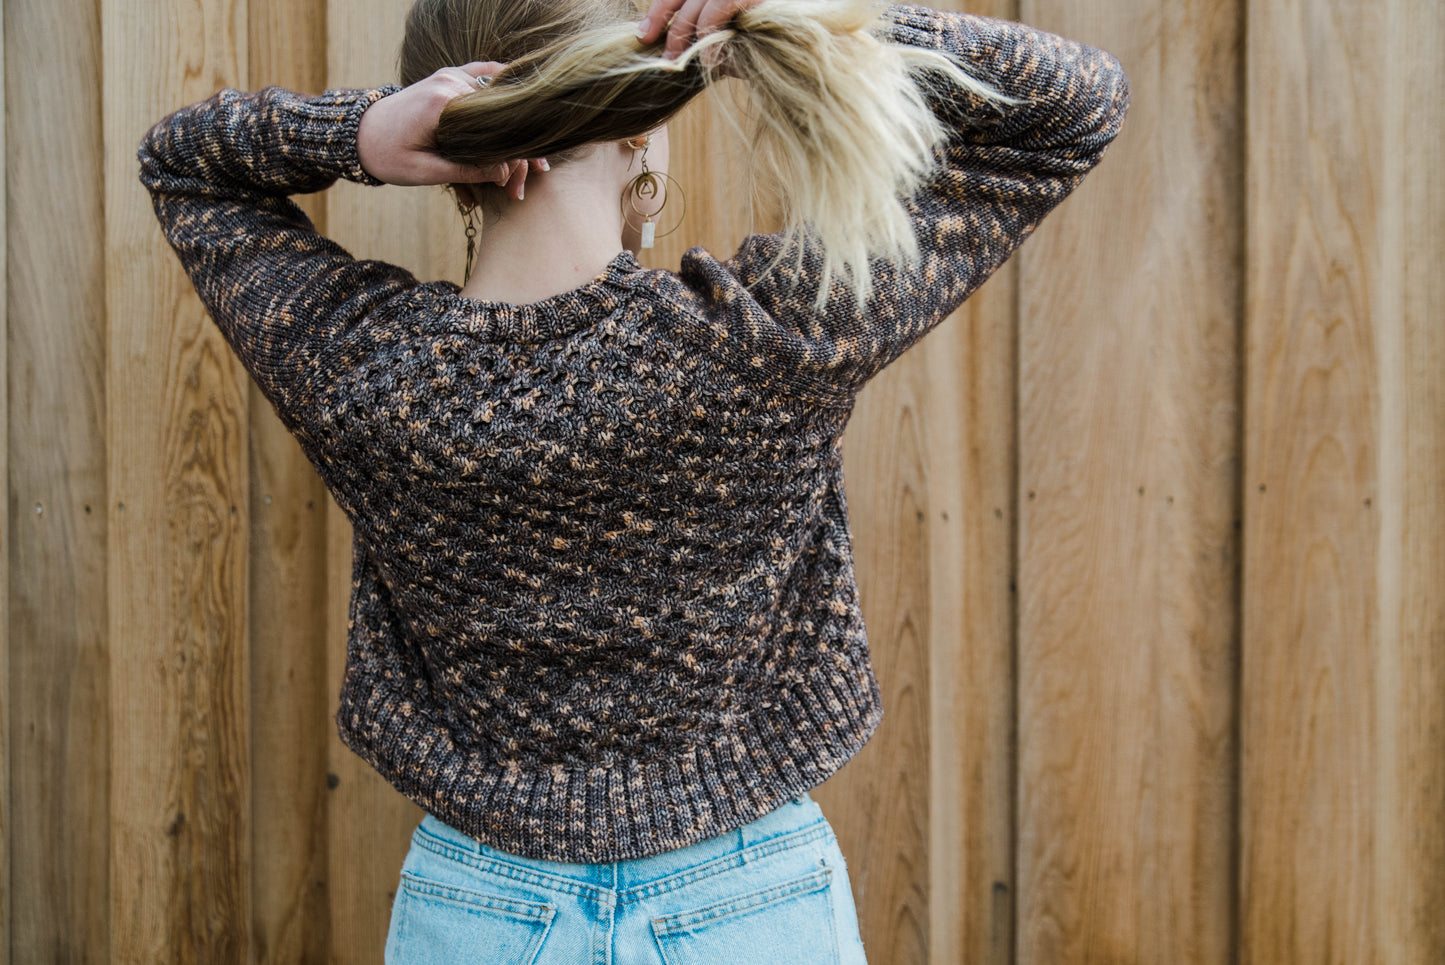 See from behind, Haley pulls her long blonde hair up of her shoulders to show off the ribbed collar and raglan construction of her sweater. The sweater is cropped, falling at her waist, and features a honeycomb stitch pattern on the torso.